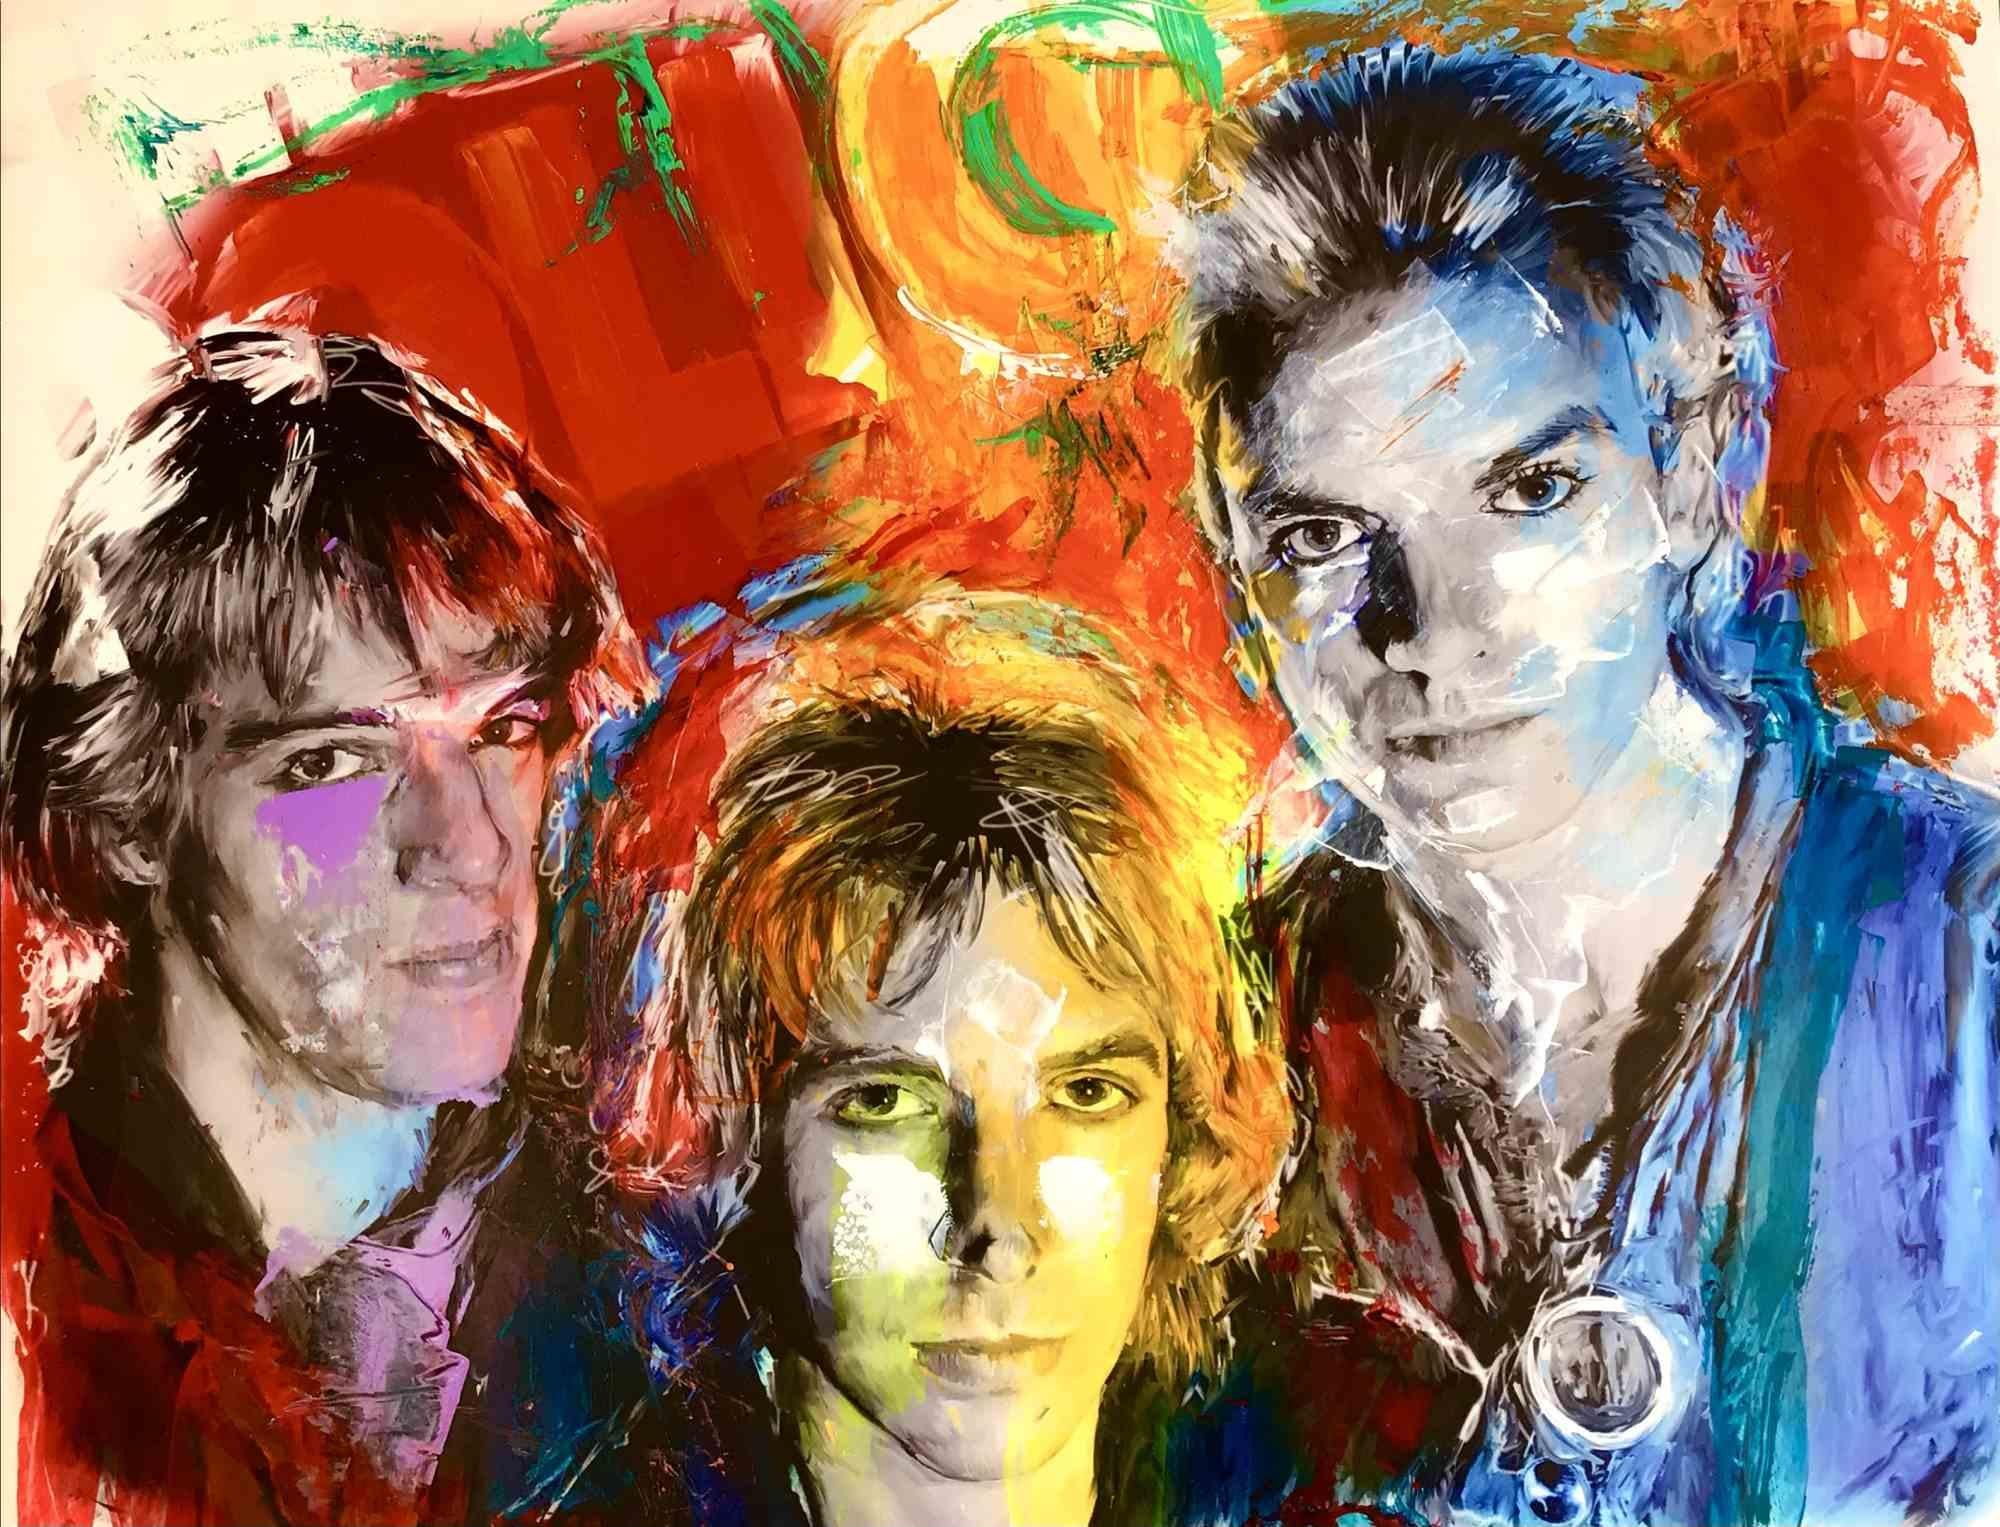 The Police - Paintings by Ivana Burello - 2018